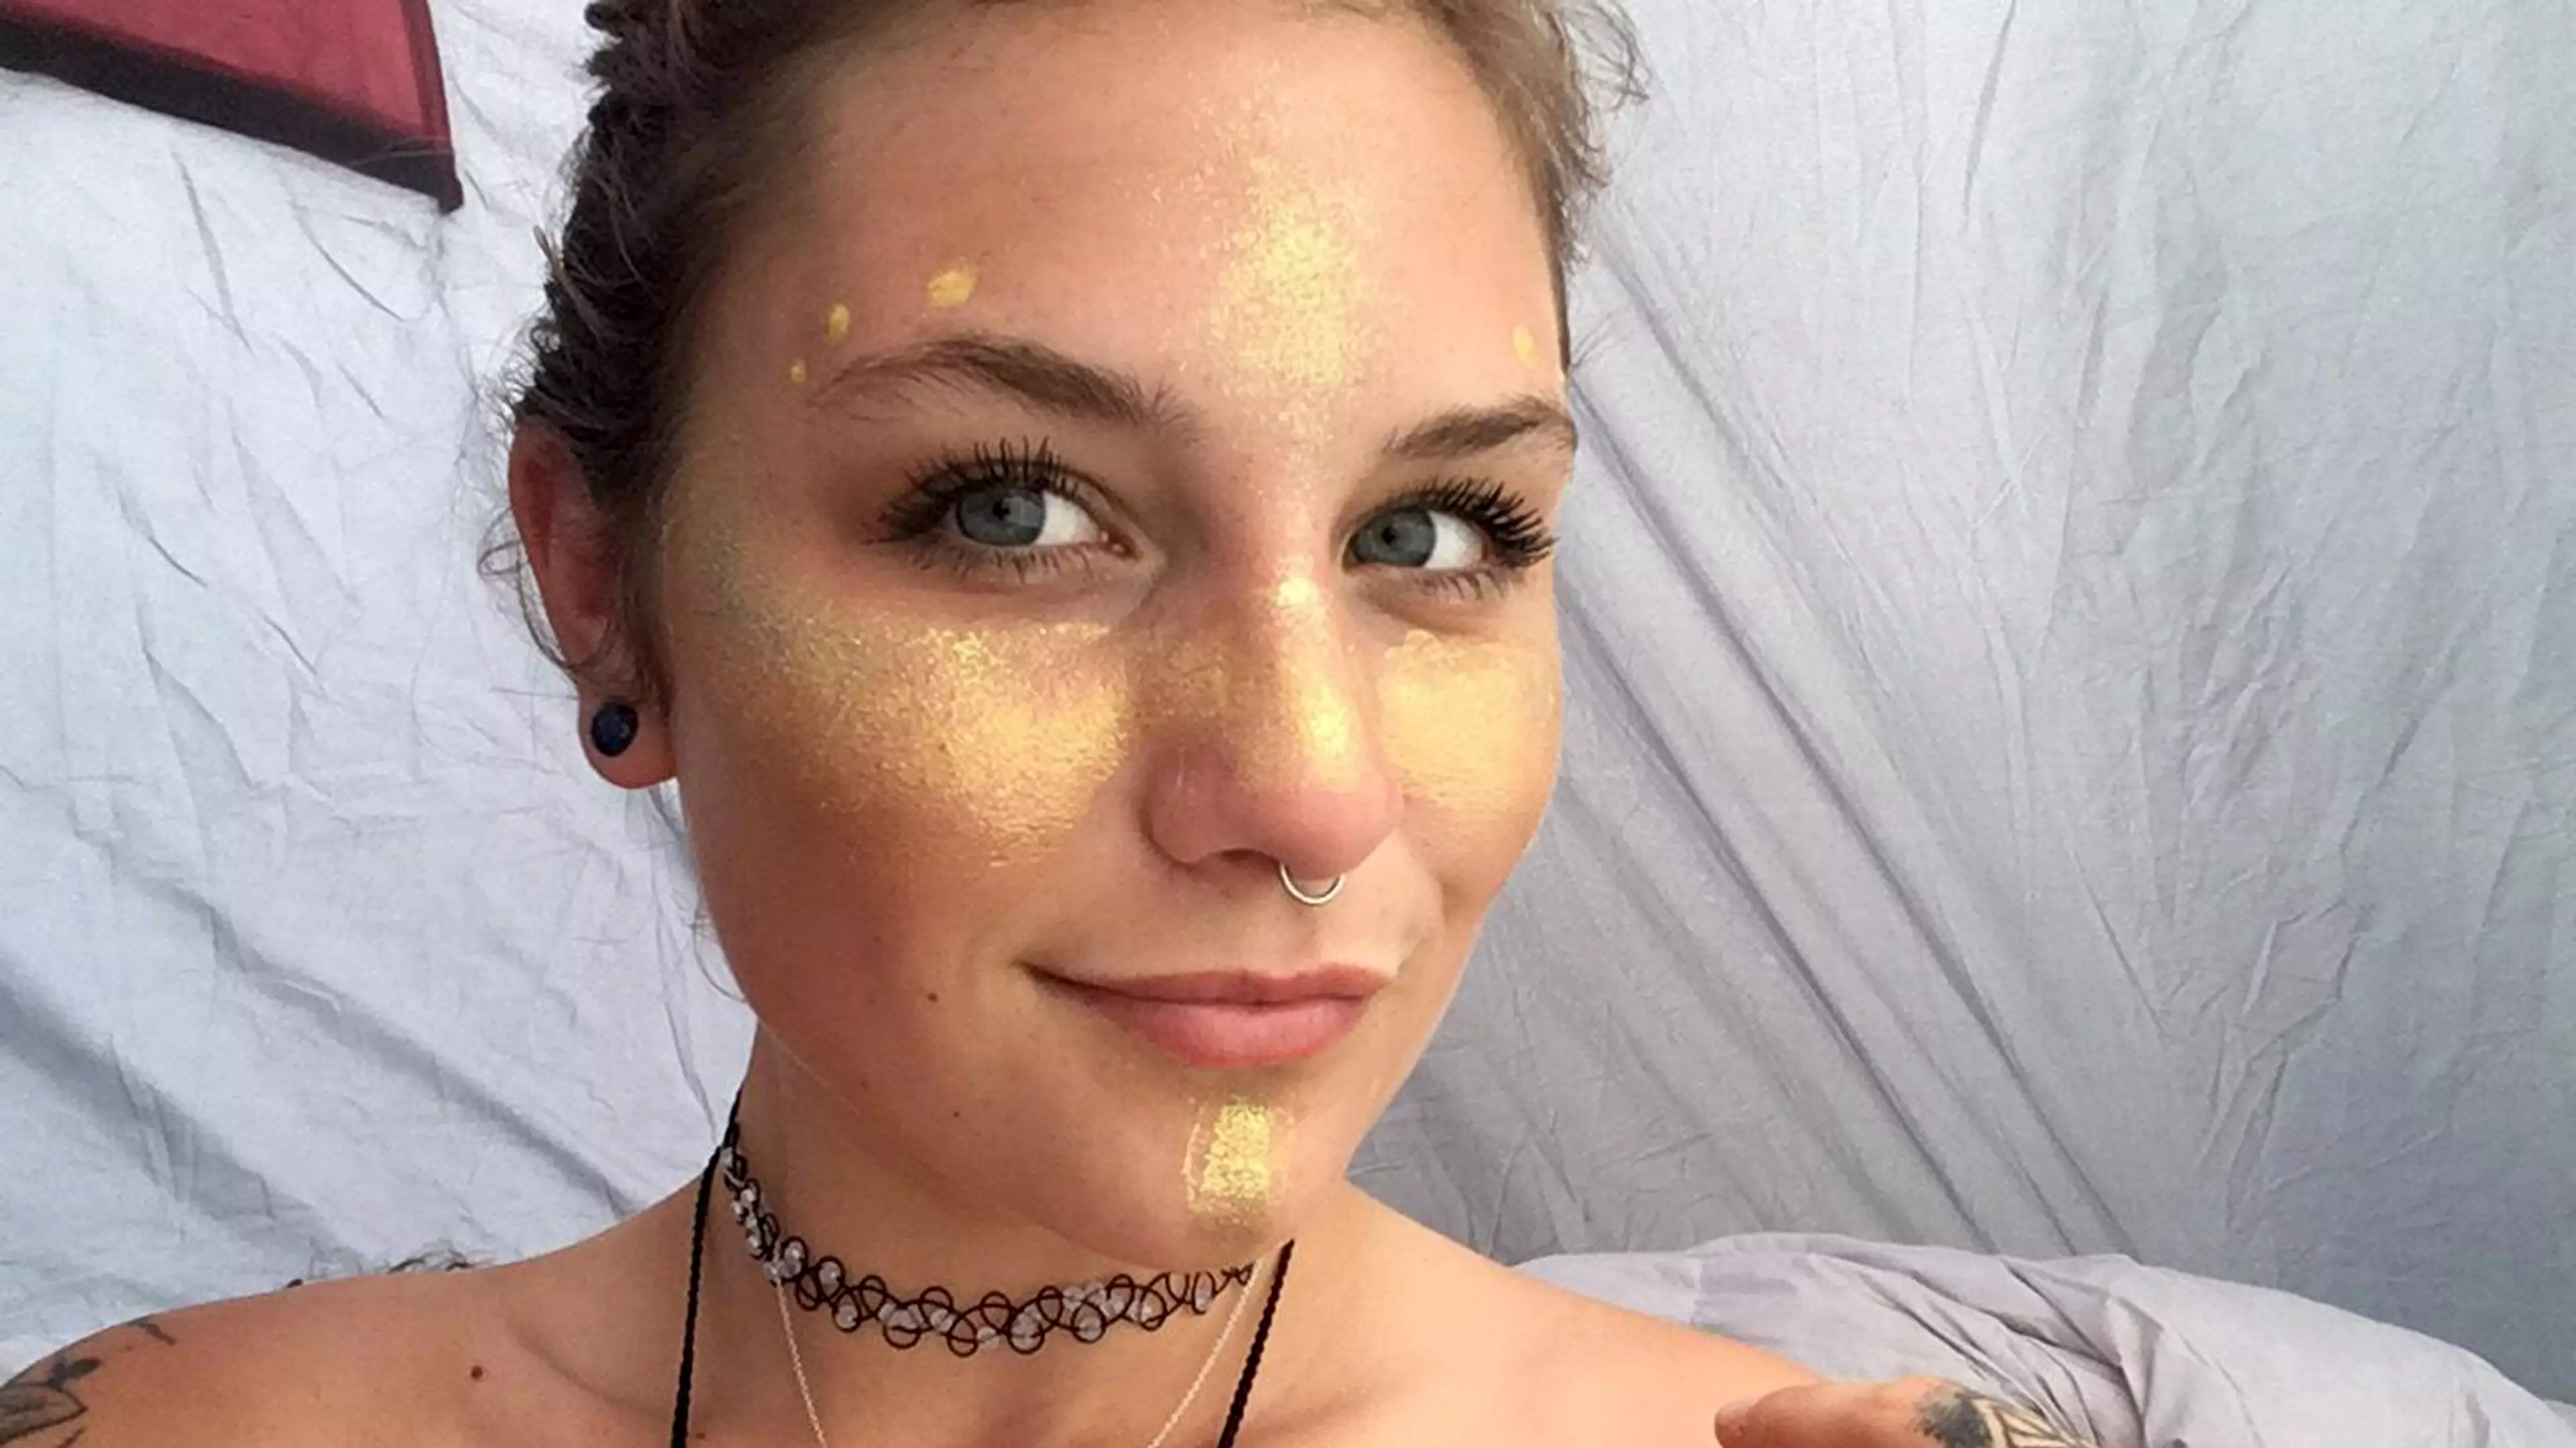 Woman Groped While Topless At Festival Says Trolls Are Trying To Get Her Deported 